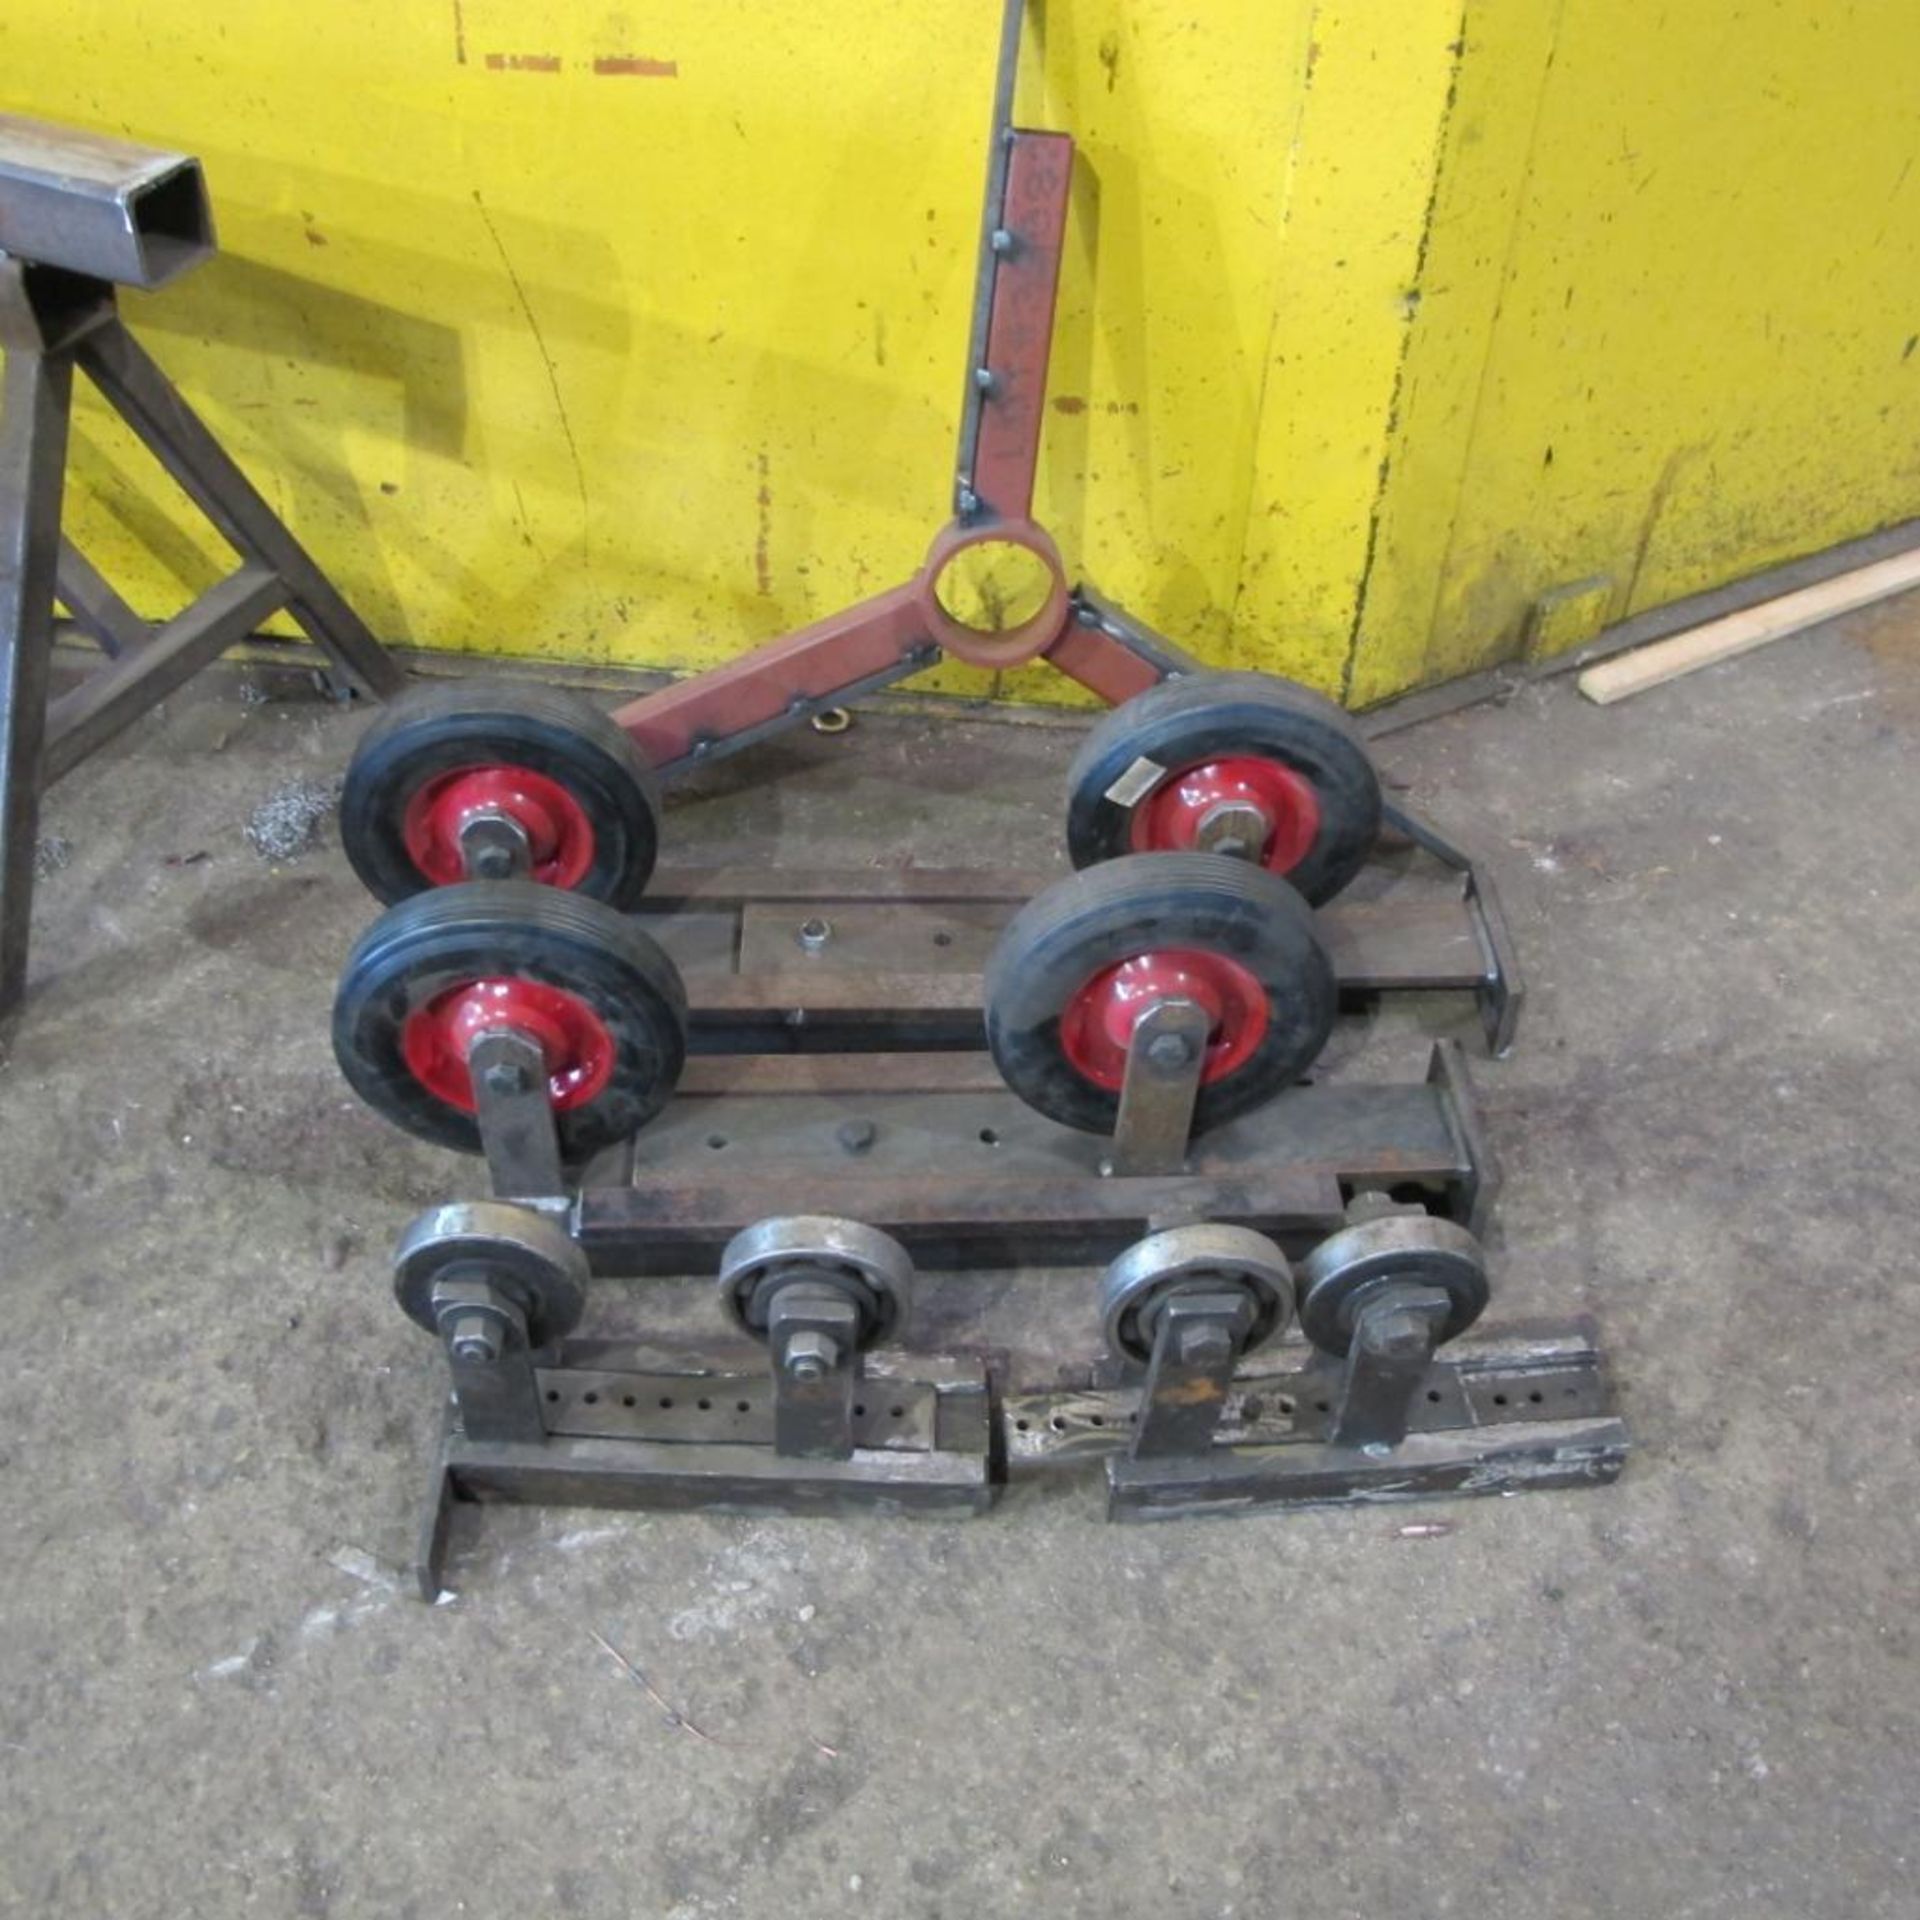 LOT OF 2 - 20" FLOOR MAGNETS, CART, CREEPER AND ROLLERS (FABRICATION SHOP) - Image 3 of 3